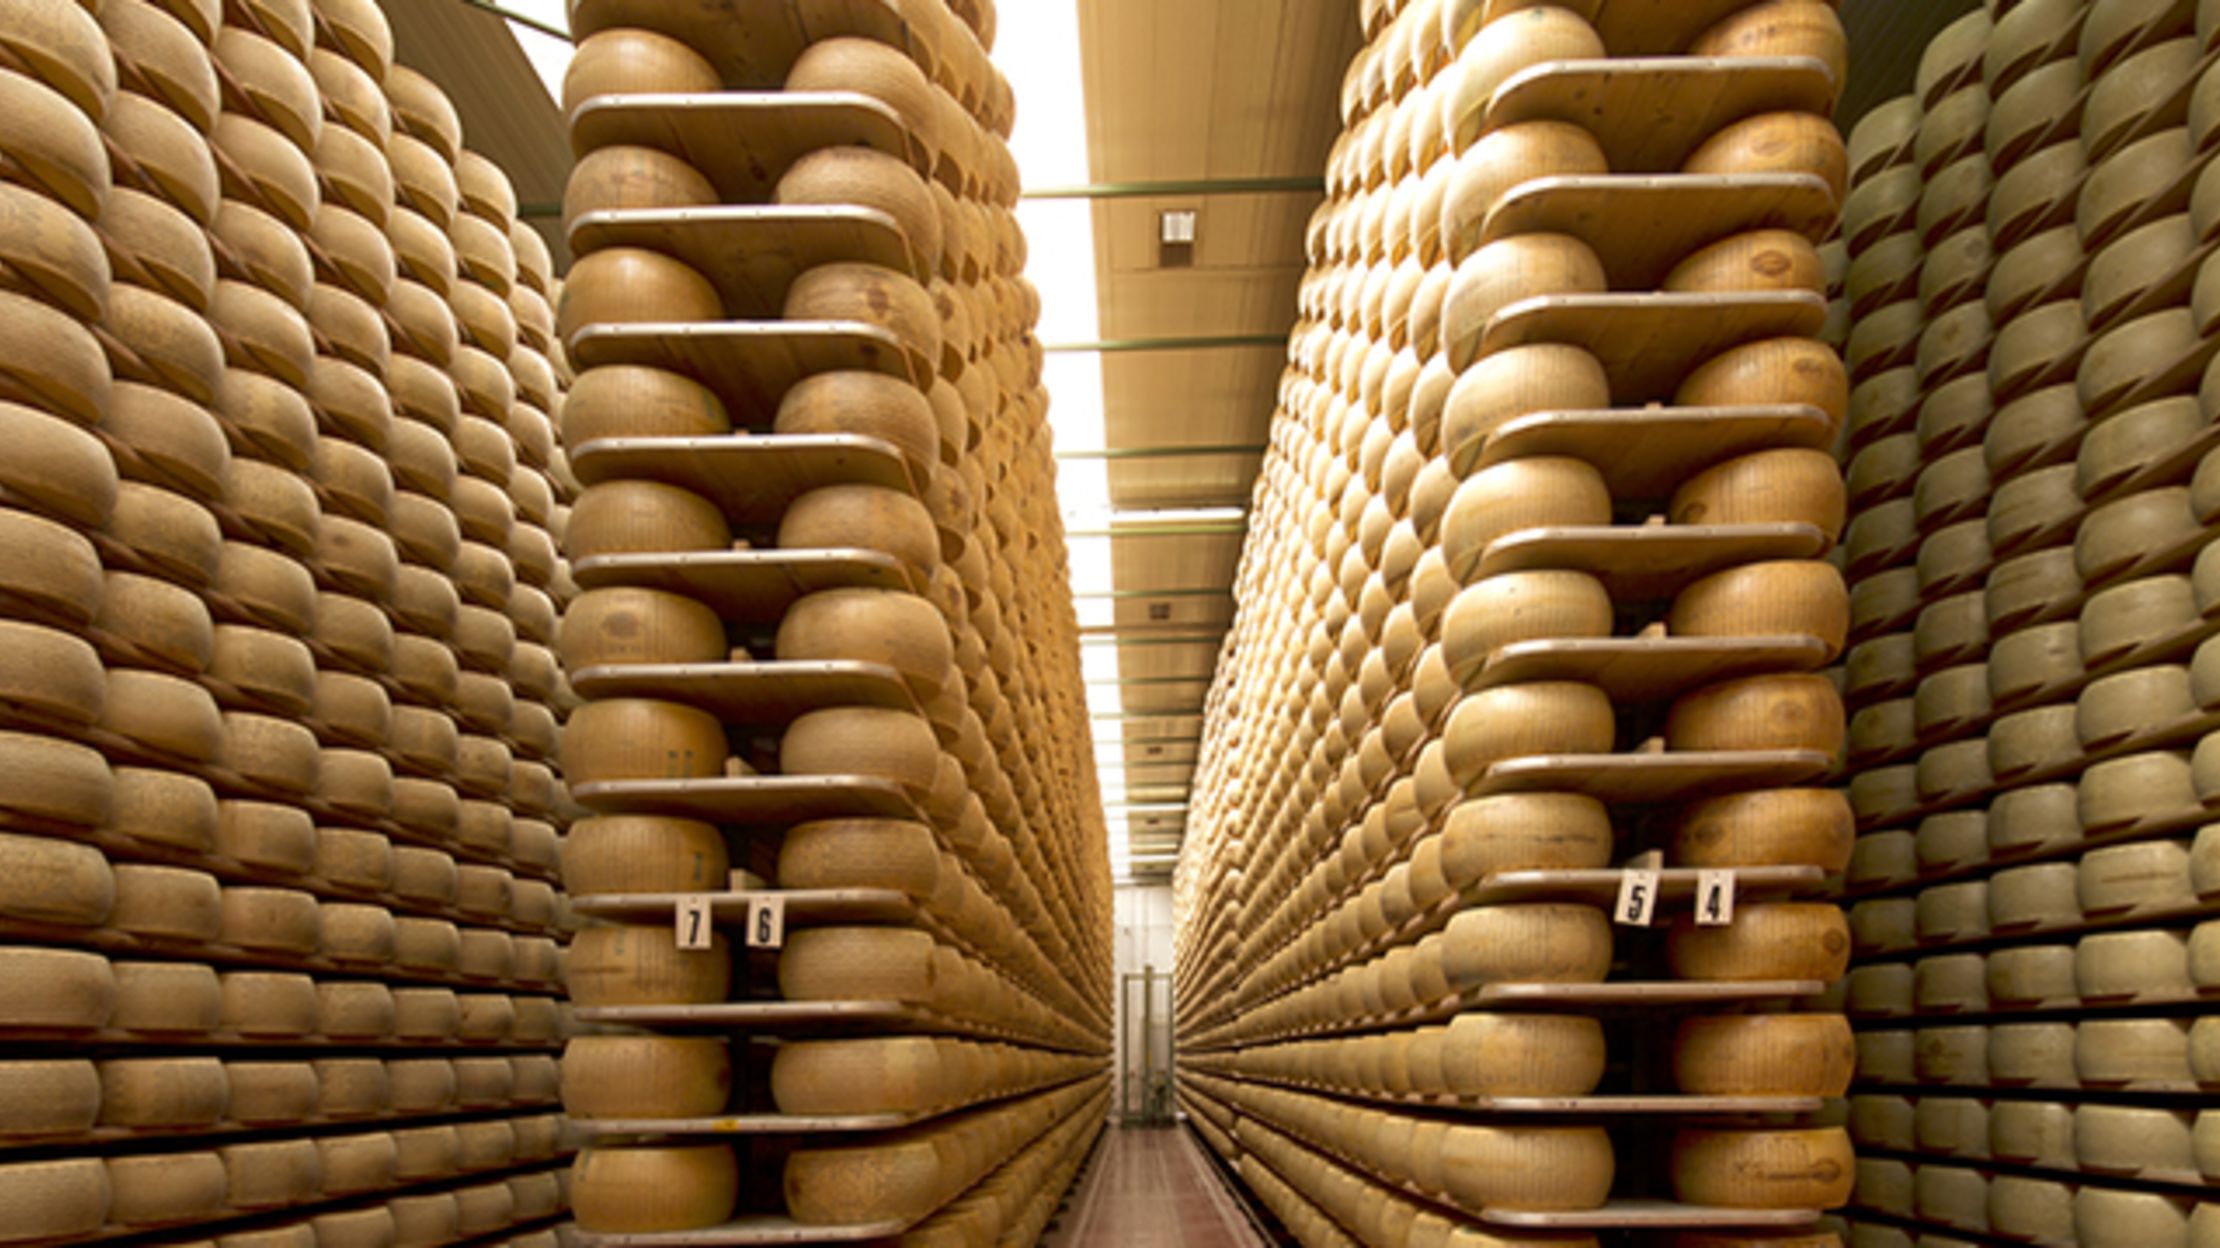 A Delicious Asset: Inside Italy's Cheese Bank | Mental Floss